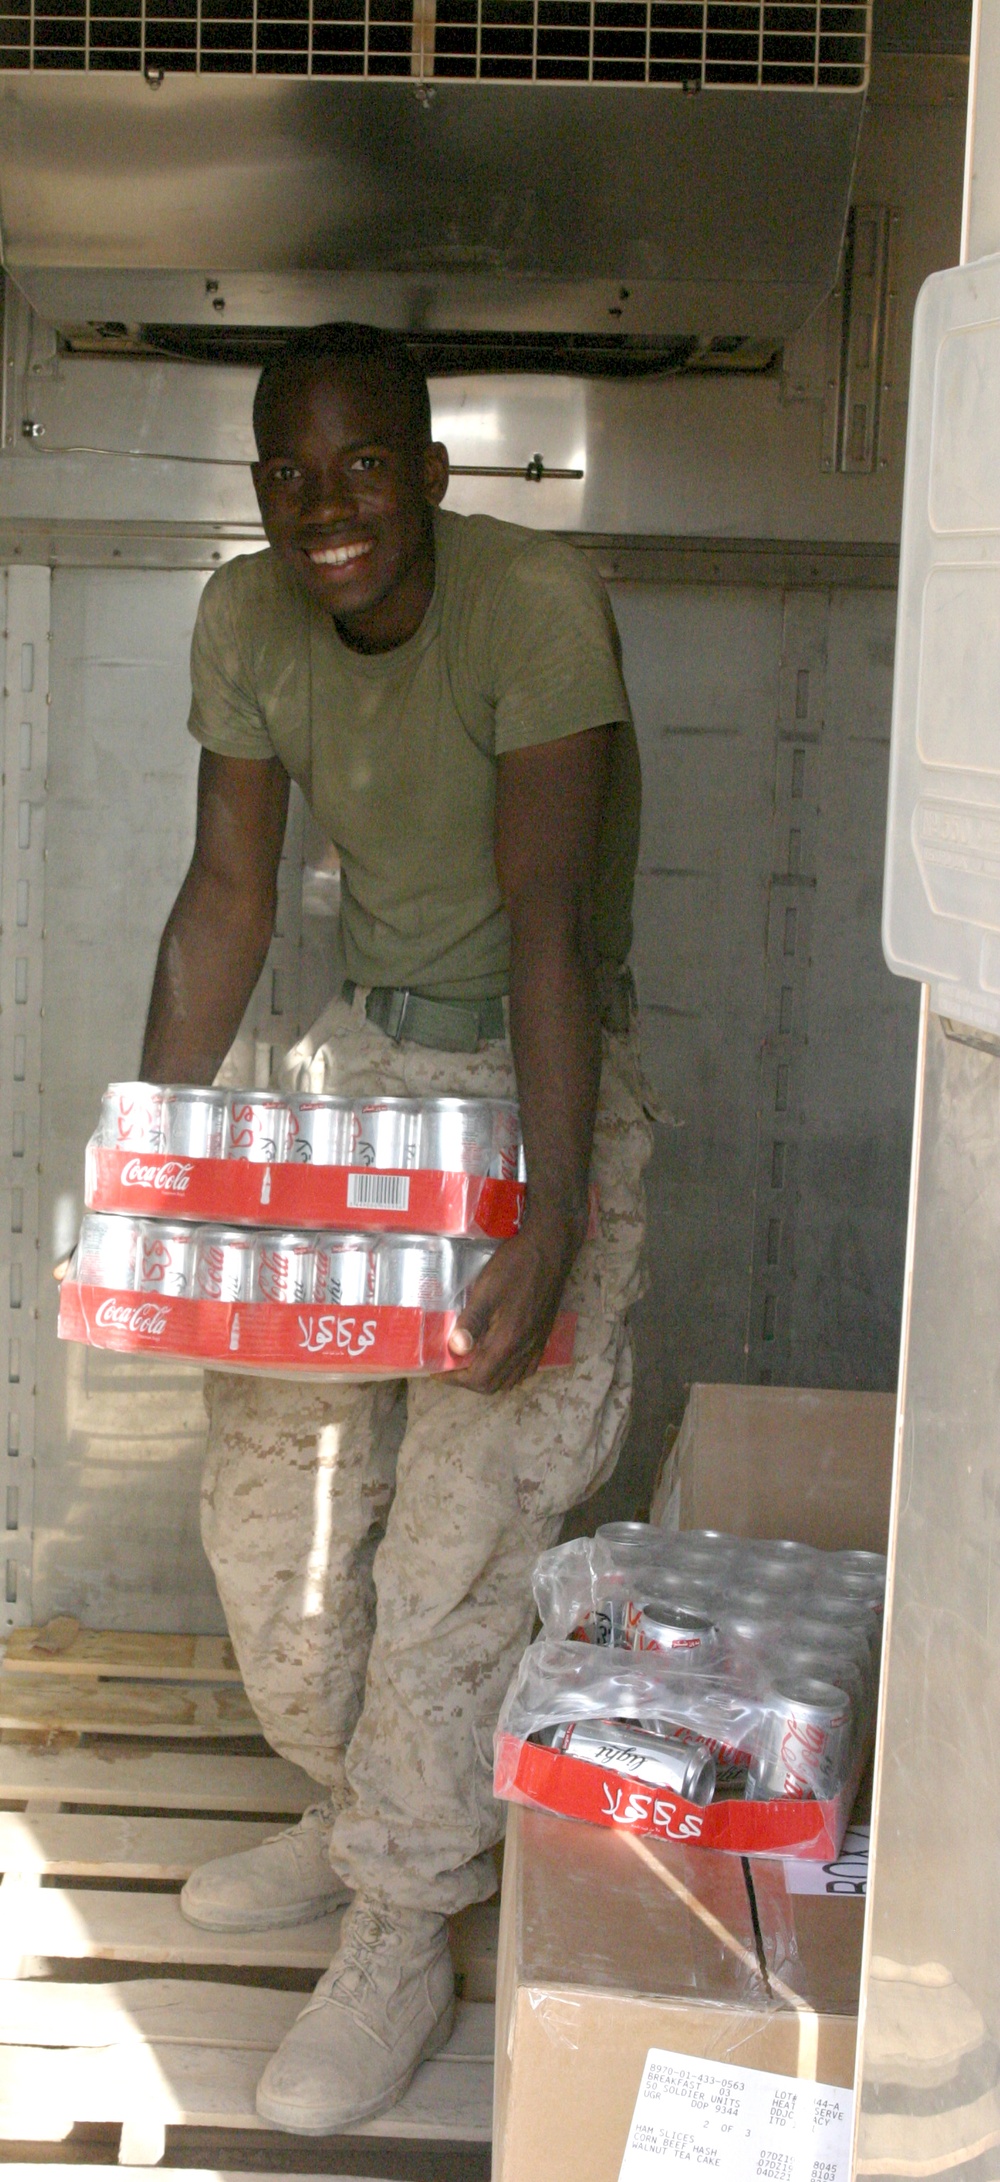 Good Food Equals High Morale for Marines in Marjah